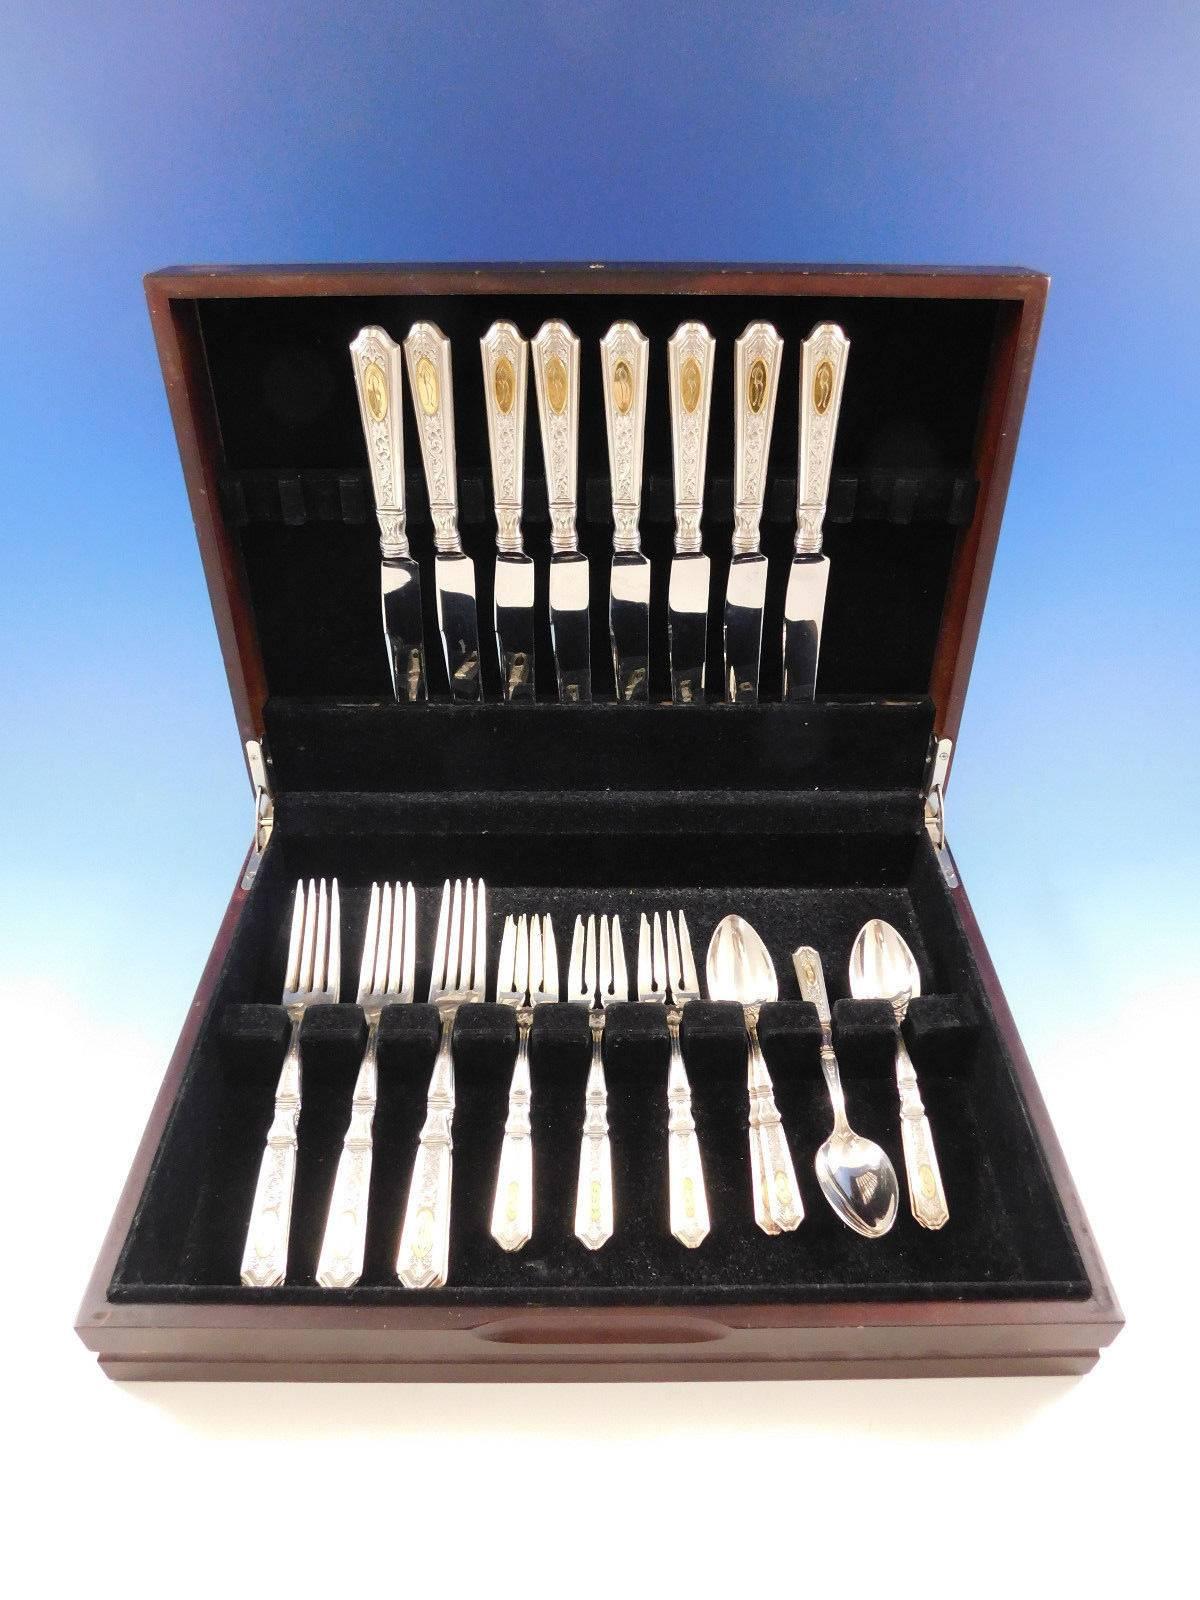 Dinner size Saint Dunstan Chased with Gold Accent by Gorham sterling silver flatware set - 32 pieces. This set includes: 

8 DINNER SIZE KNIVES, 9 5/8